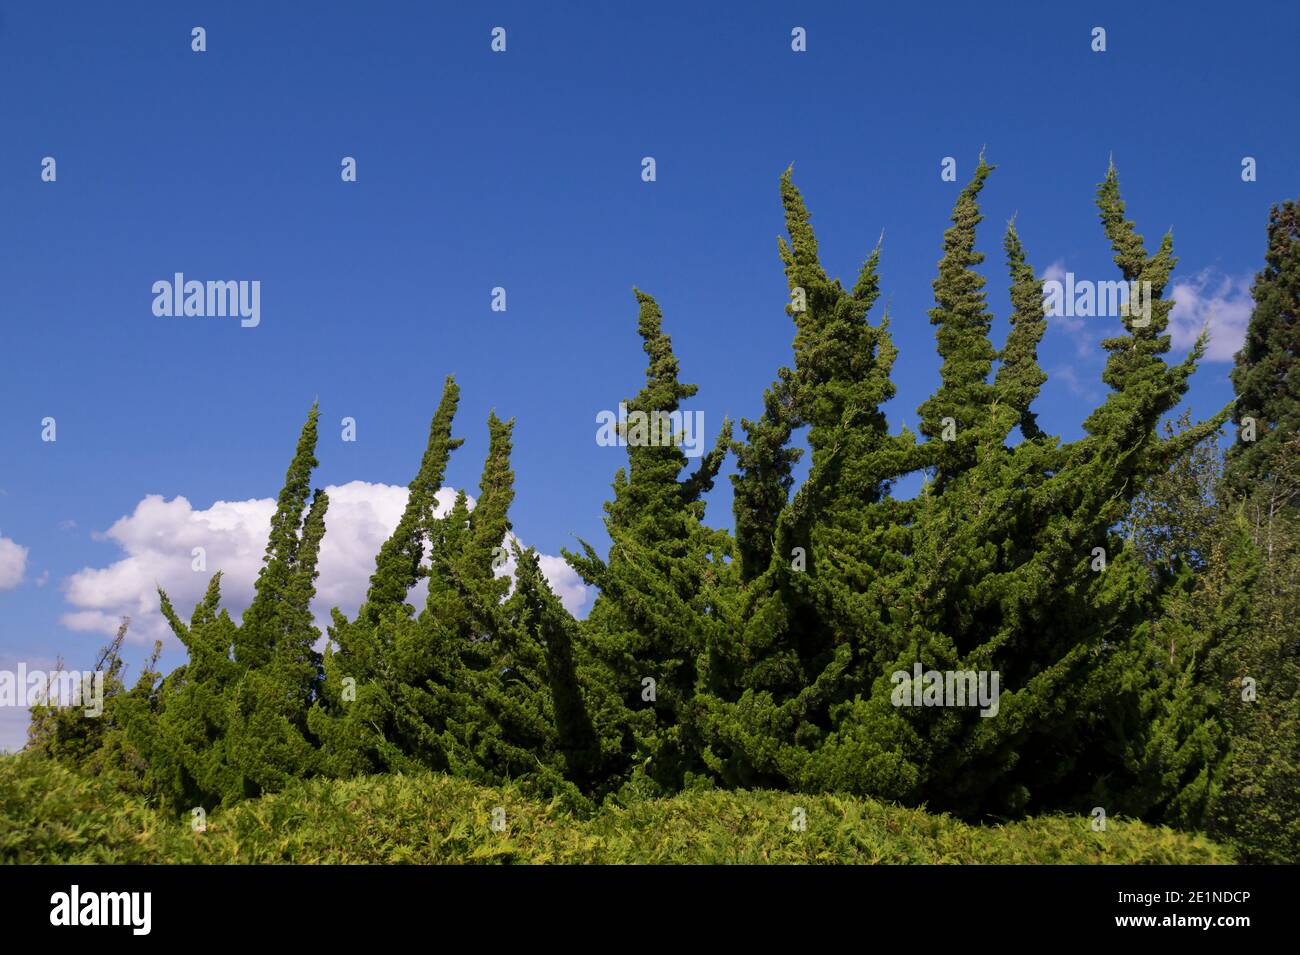 Washington State. US. Extremely decorative and attractive garden plantings with plants from the cypress family. Stock Photo